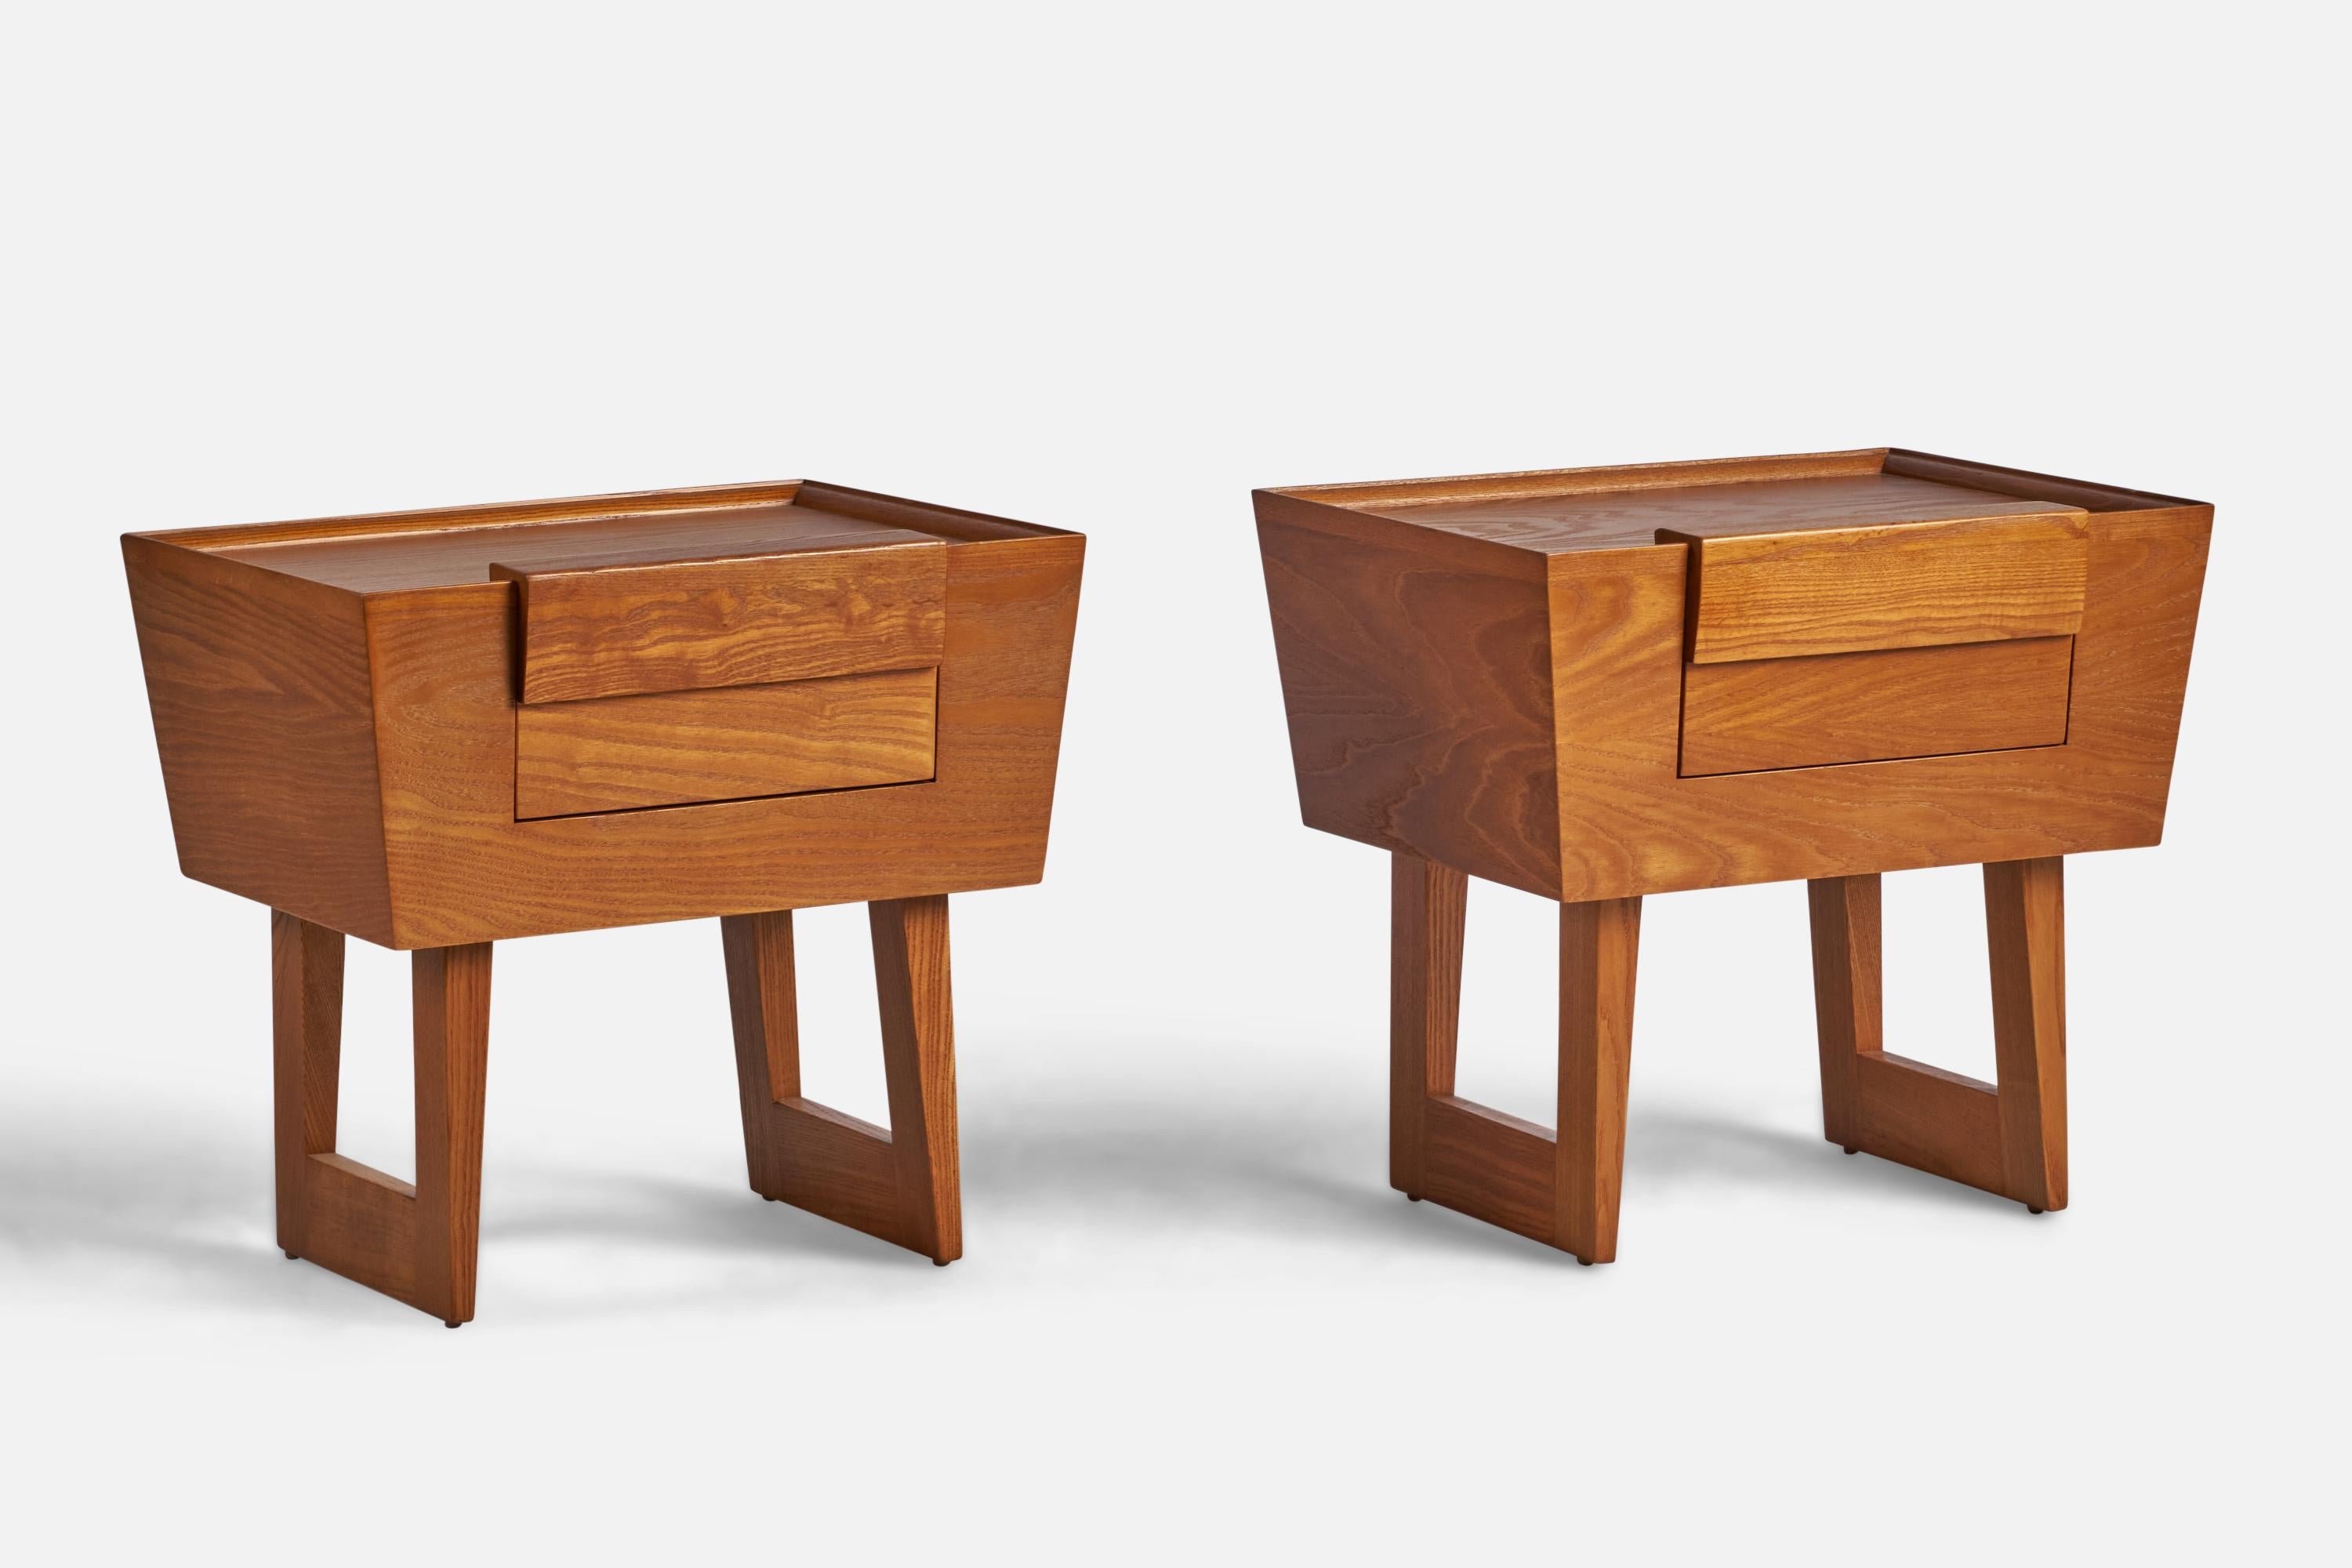 A pair of oak nightstands or bedside cabinets designed by Paul Laszlo and produced by  Brown Saltman, Sweden, 1950s.